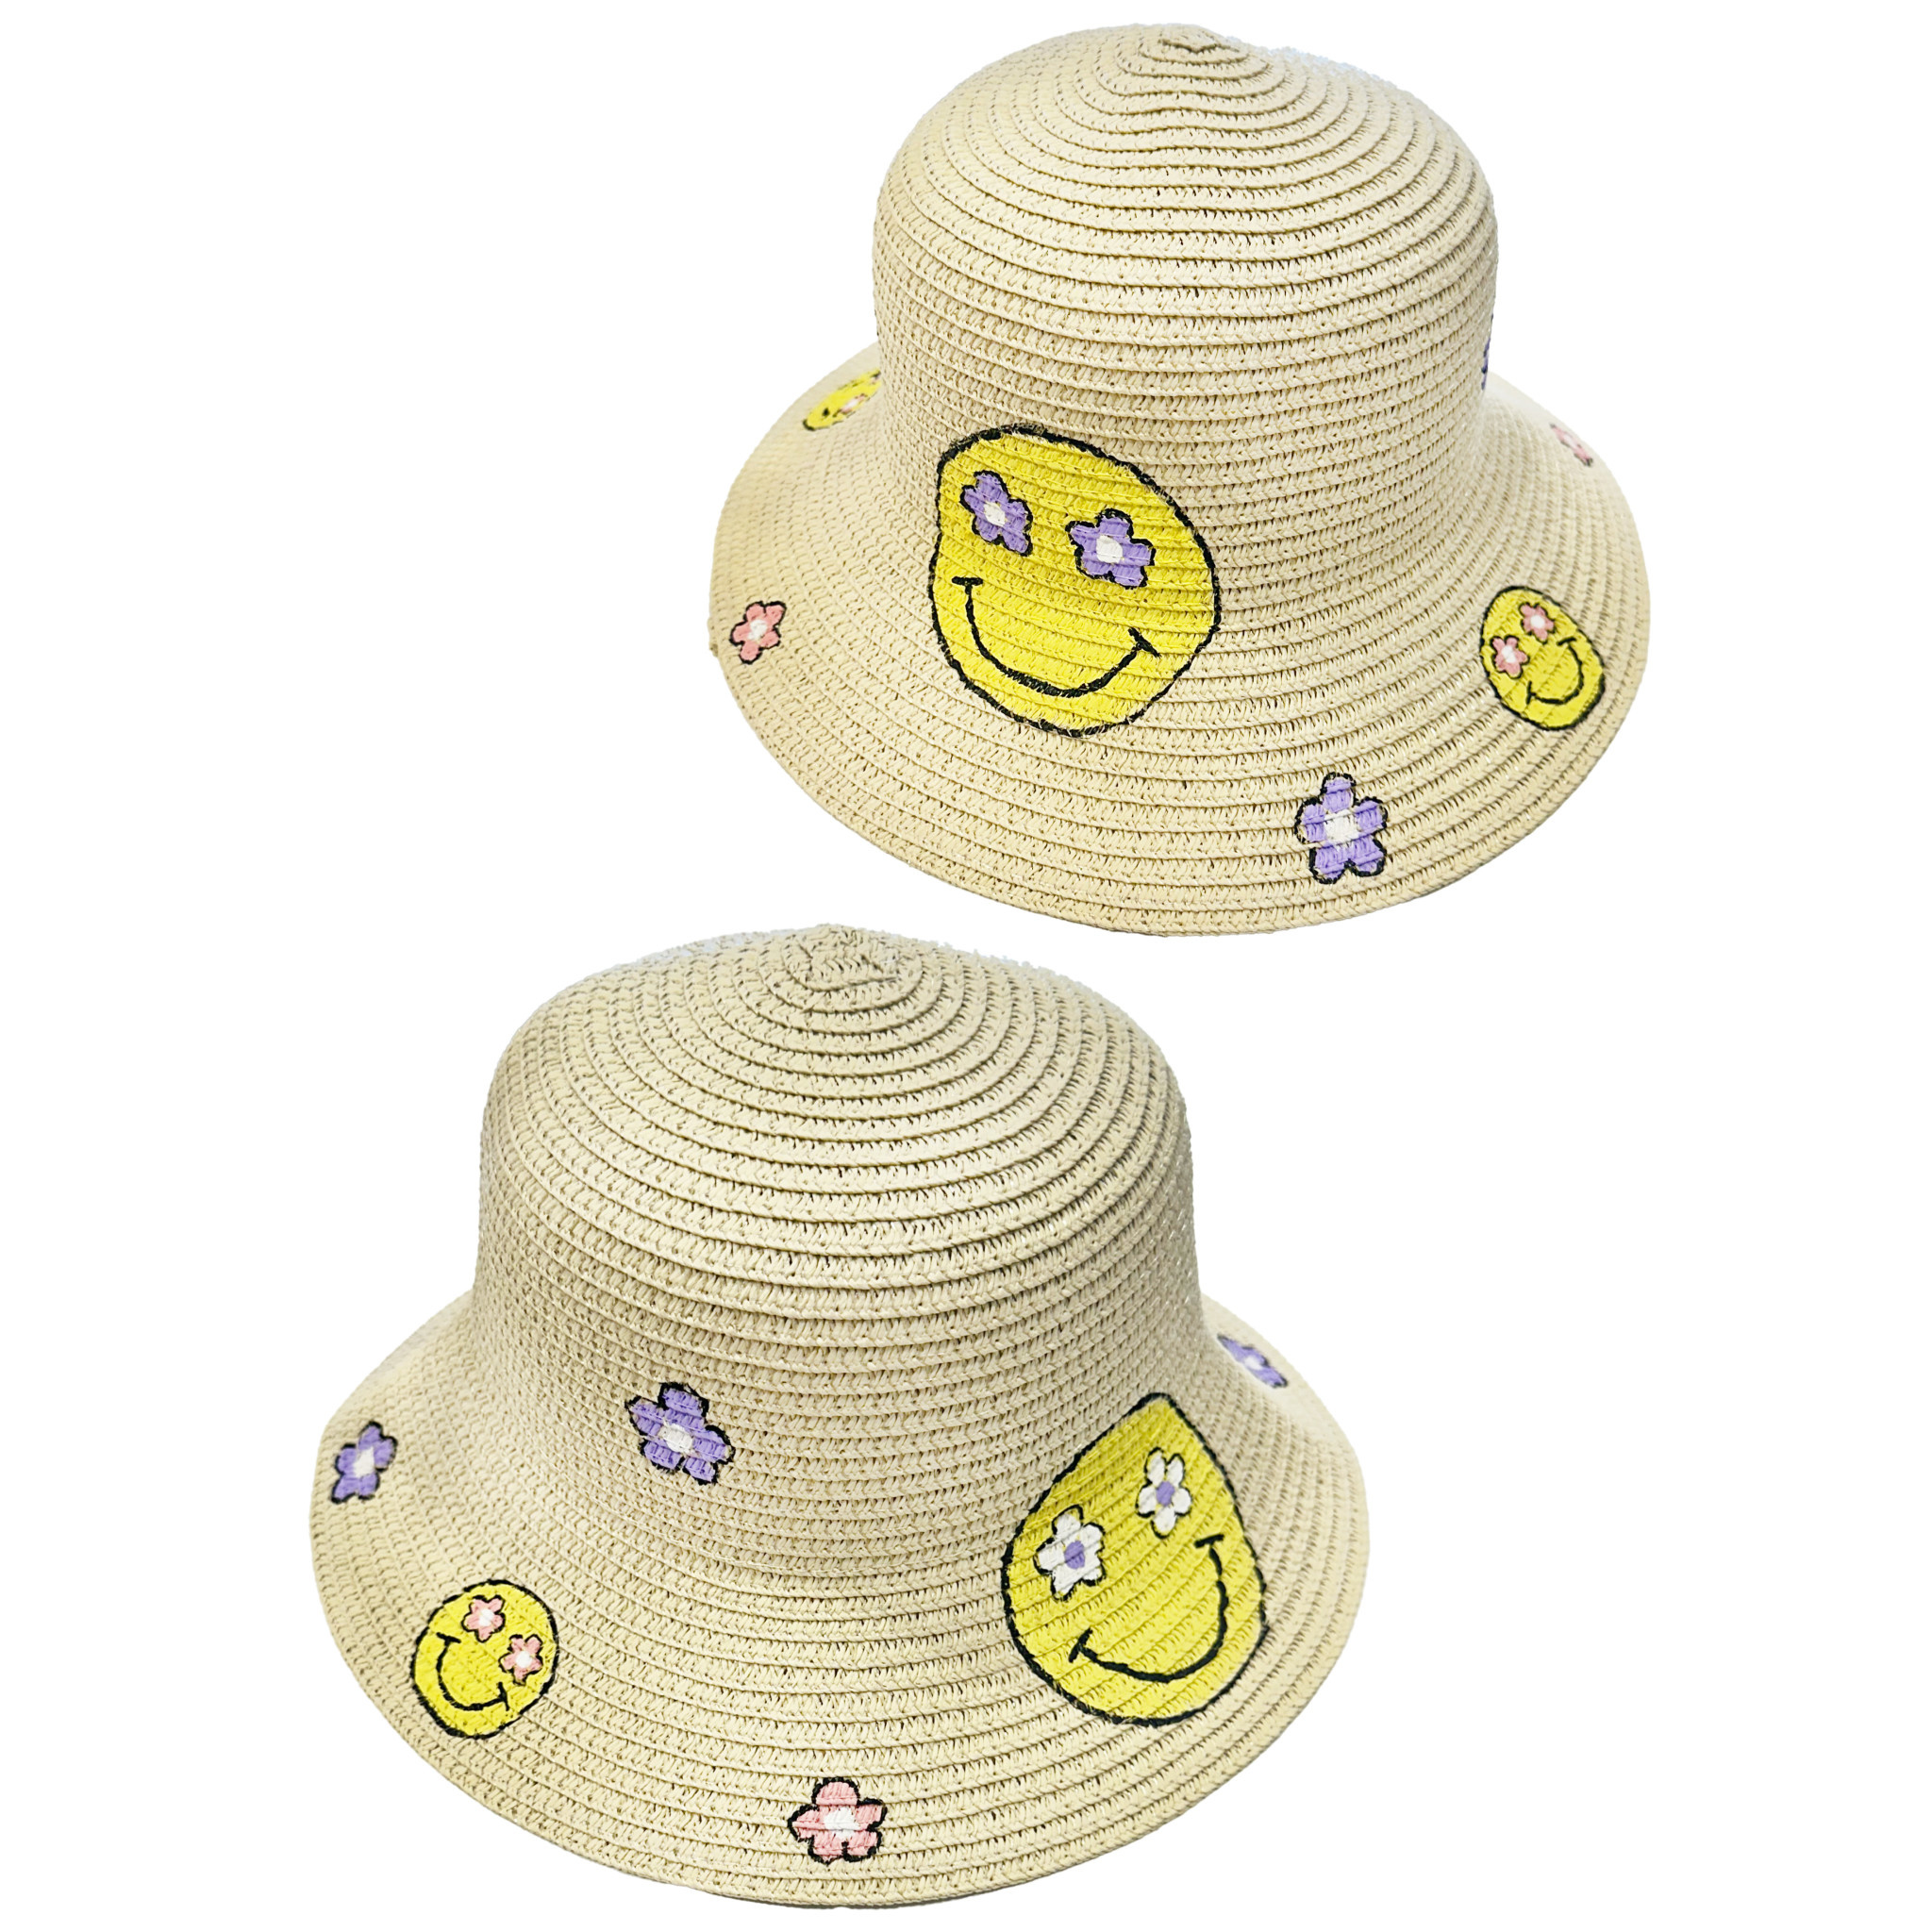 Summer Korean Style Rainbow Children's Handmade Straw Hat, Girls' Sun Hat  With Uv Protection, Woven Fishing Hat For Students With Freshness